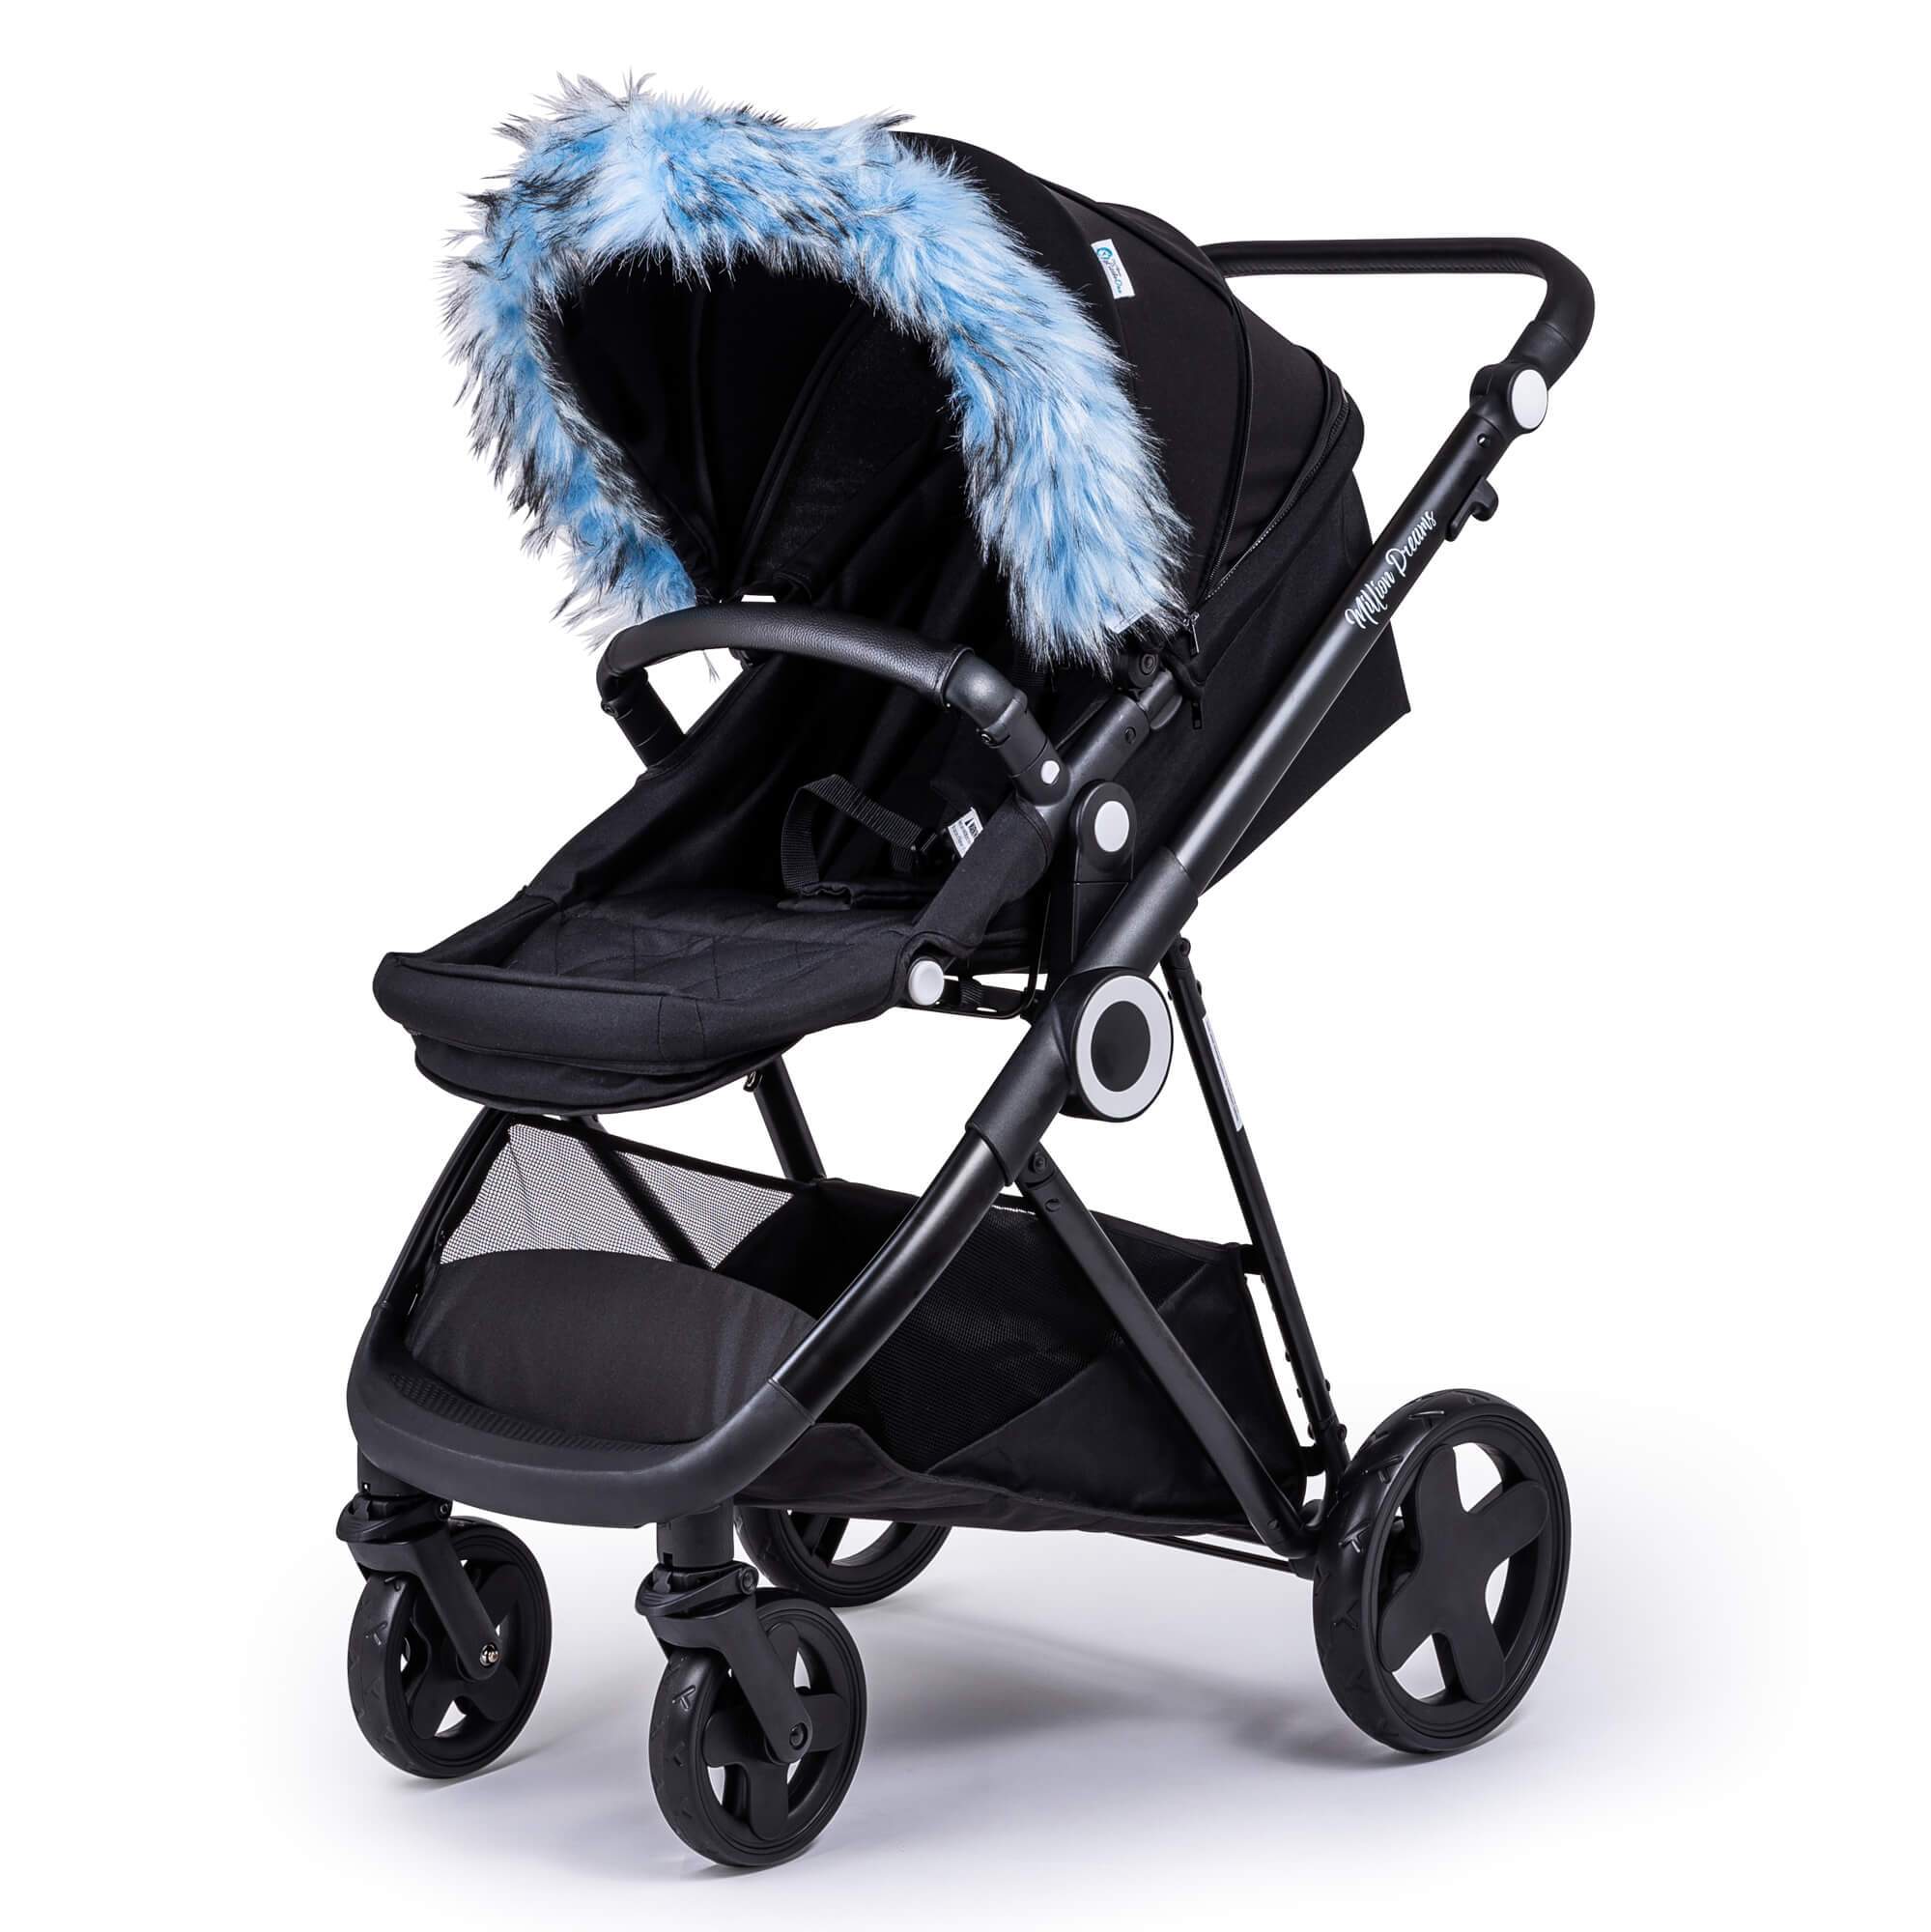 Pram Fur Hood Trim Attachment for Pushchair Compatible with BabySun - Light Blue / Fits All Models | For Your Little One